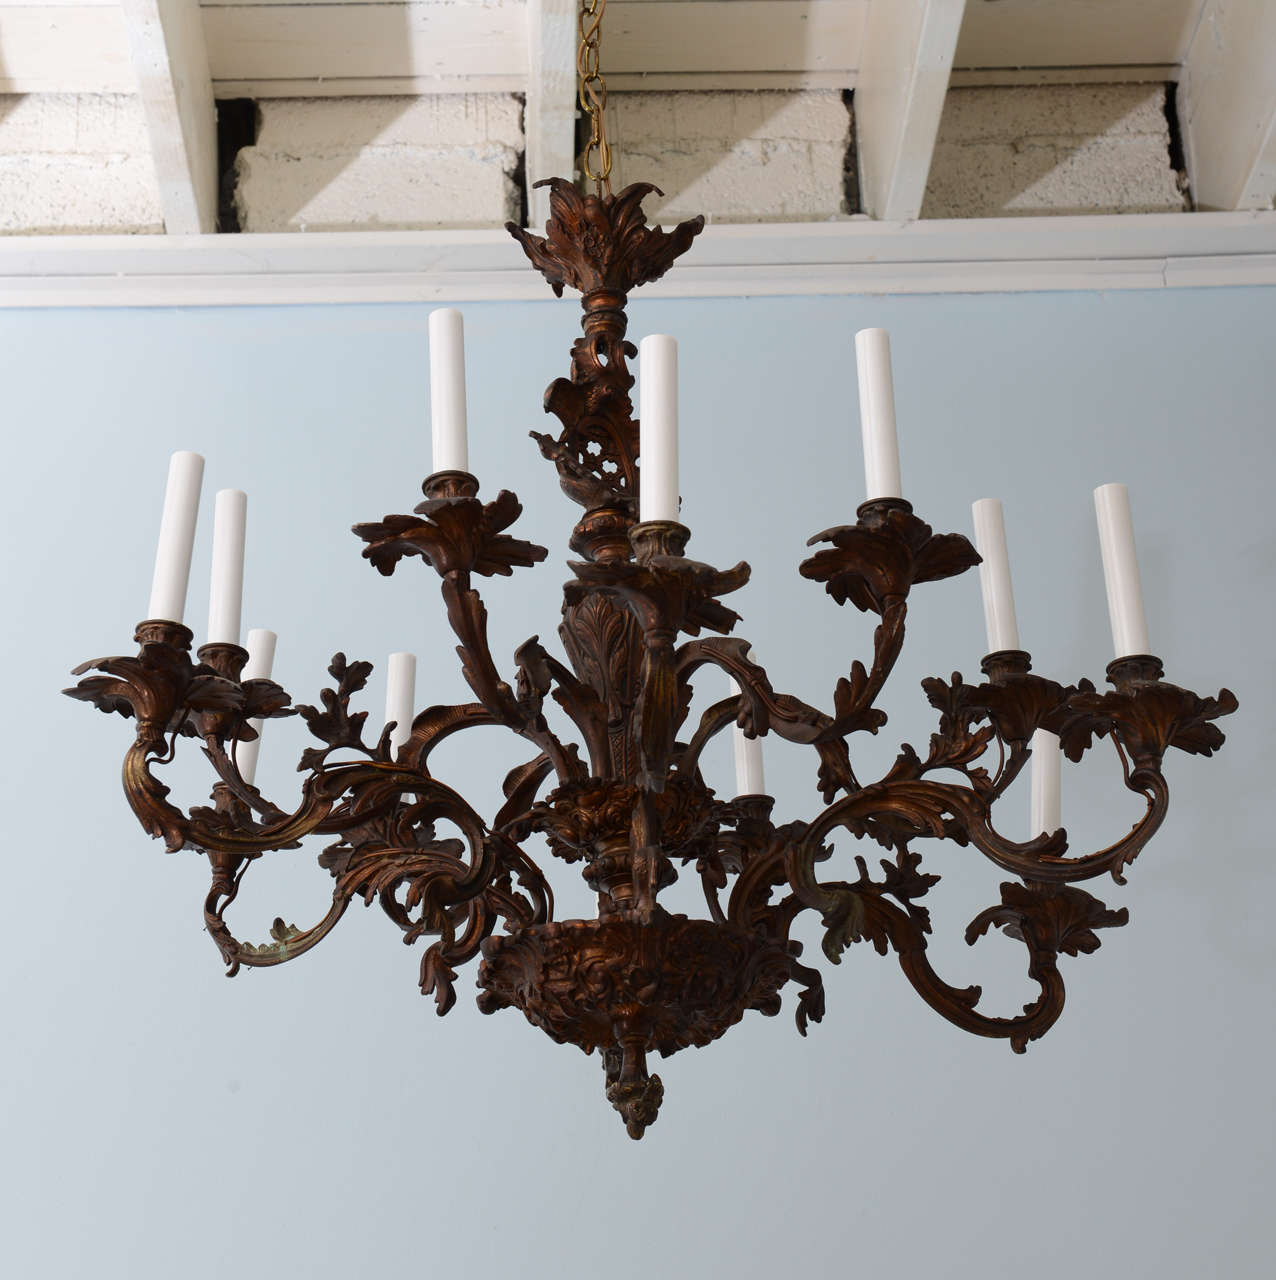 Amazing a beautiful fixture for a Classic or eclectic interior. A great example of good craftsmanship and casting. Piece in great all original condition.